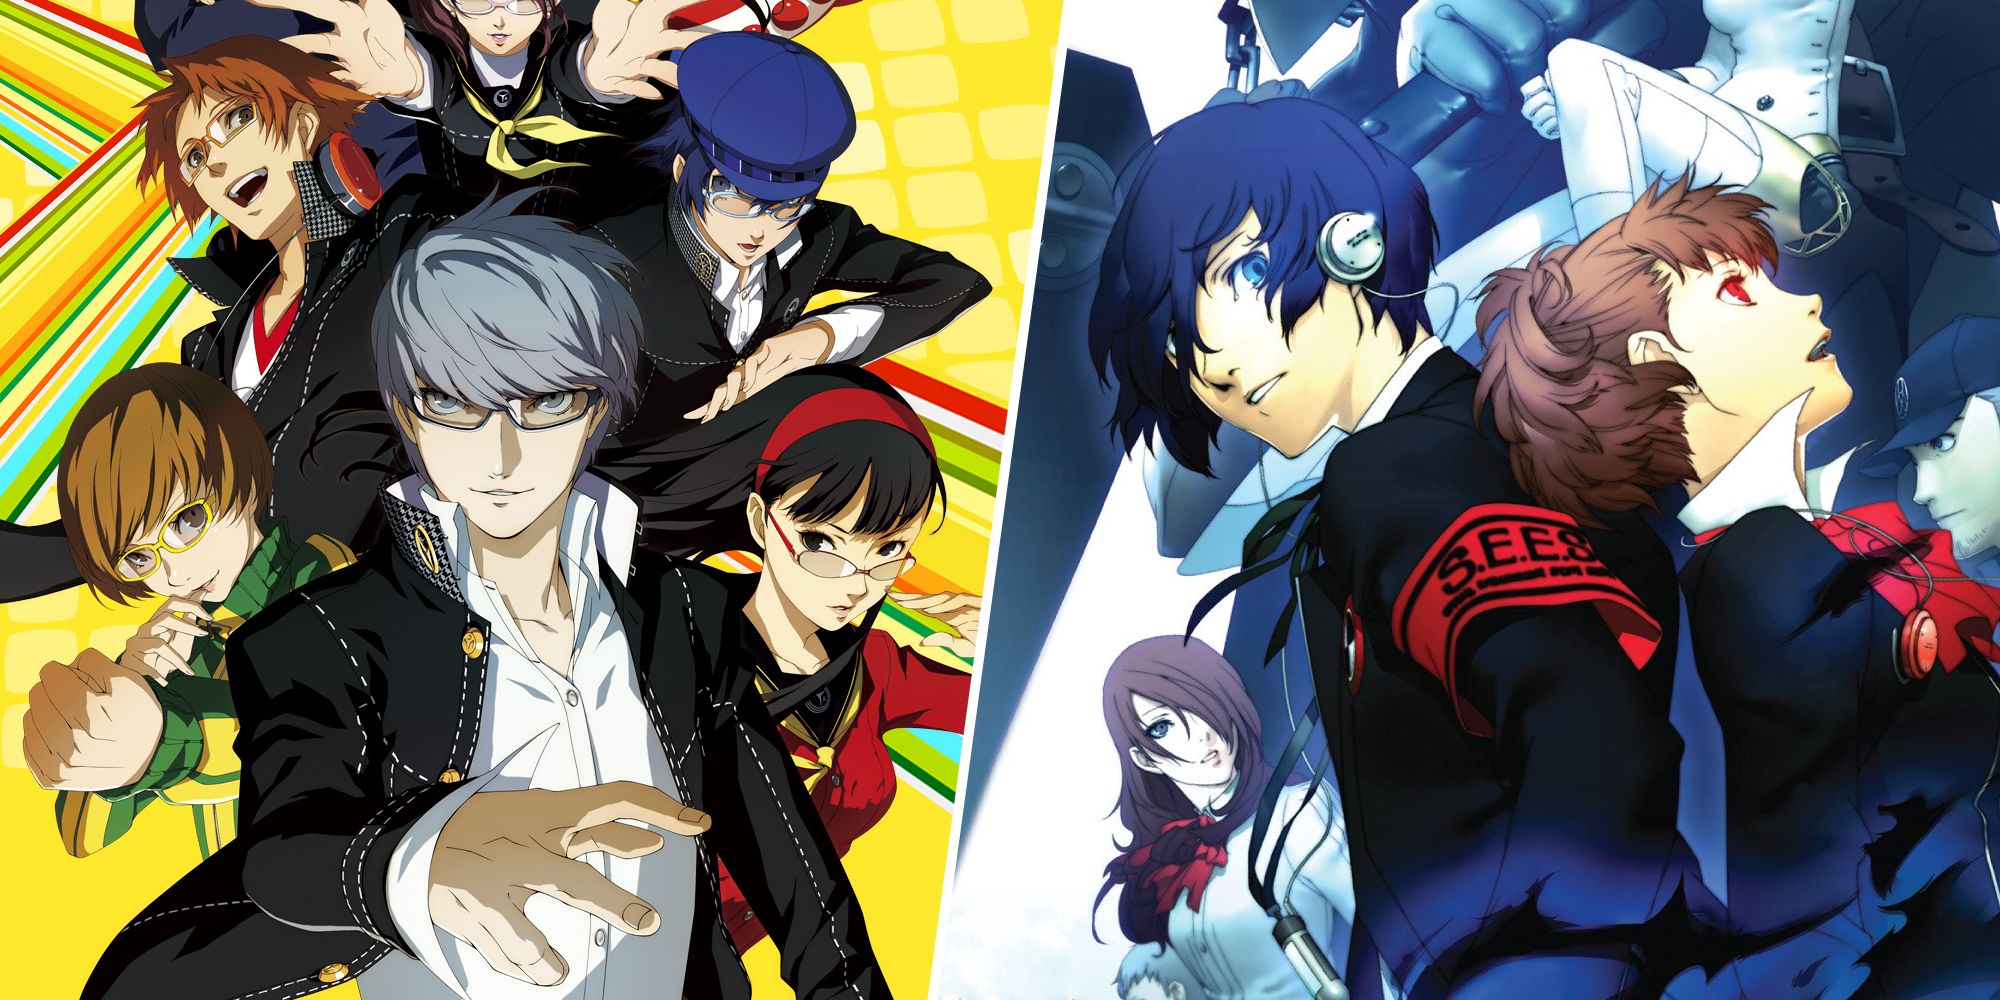 Persona 3 Portable And Persona 4 Golden Will Have Native Versions On ...